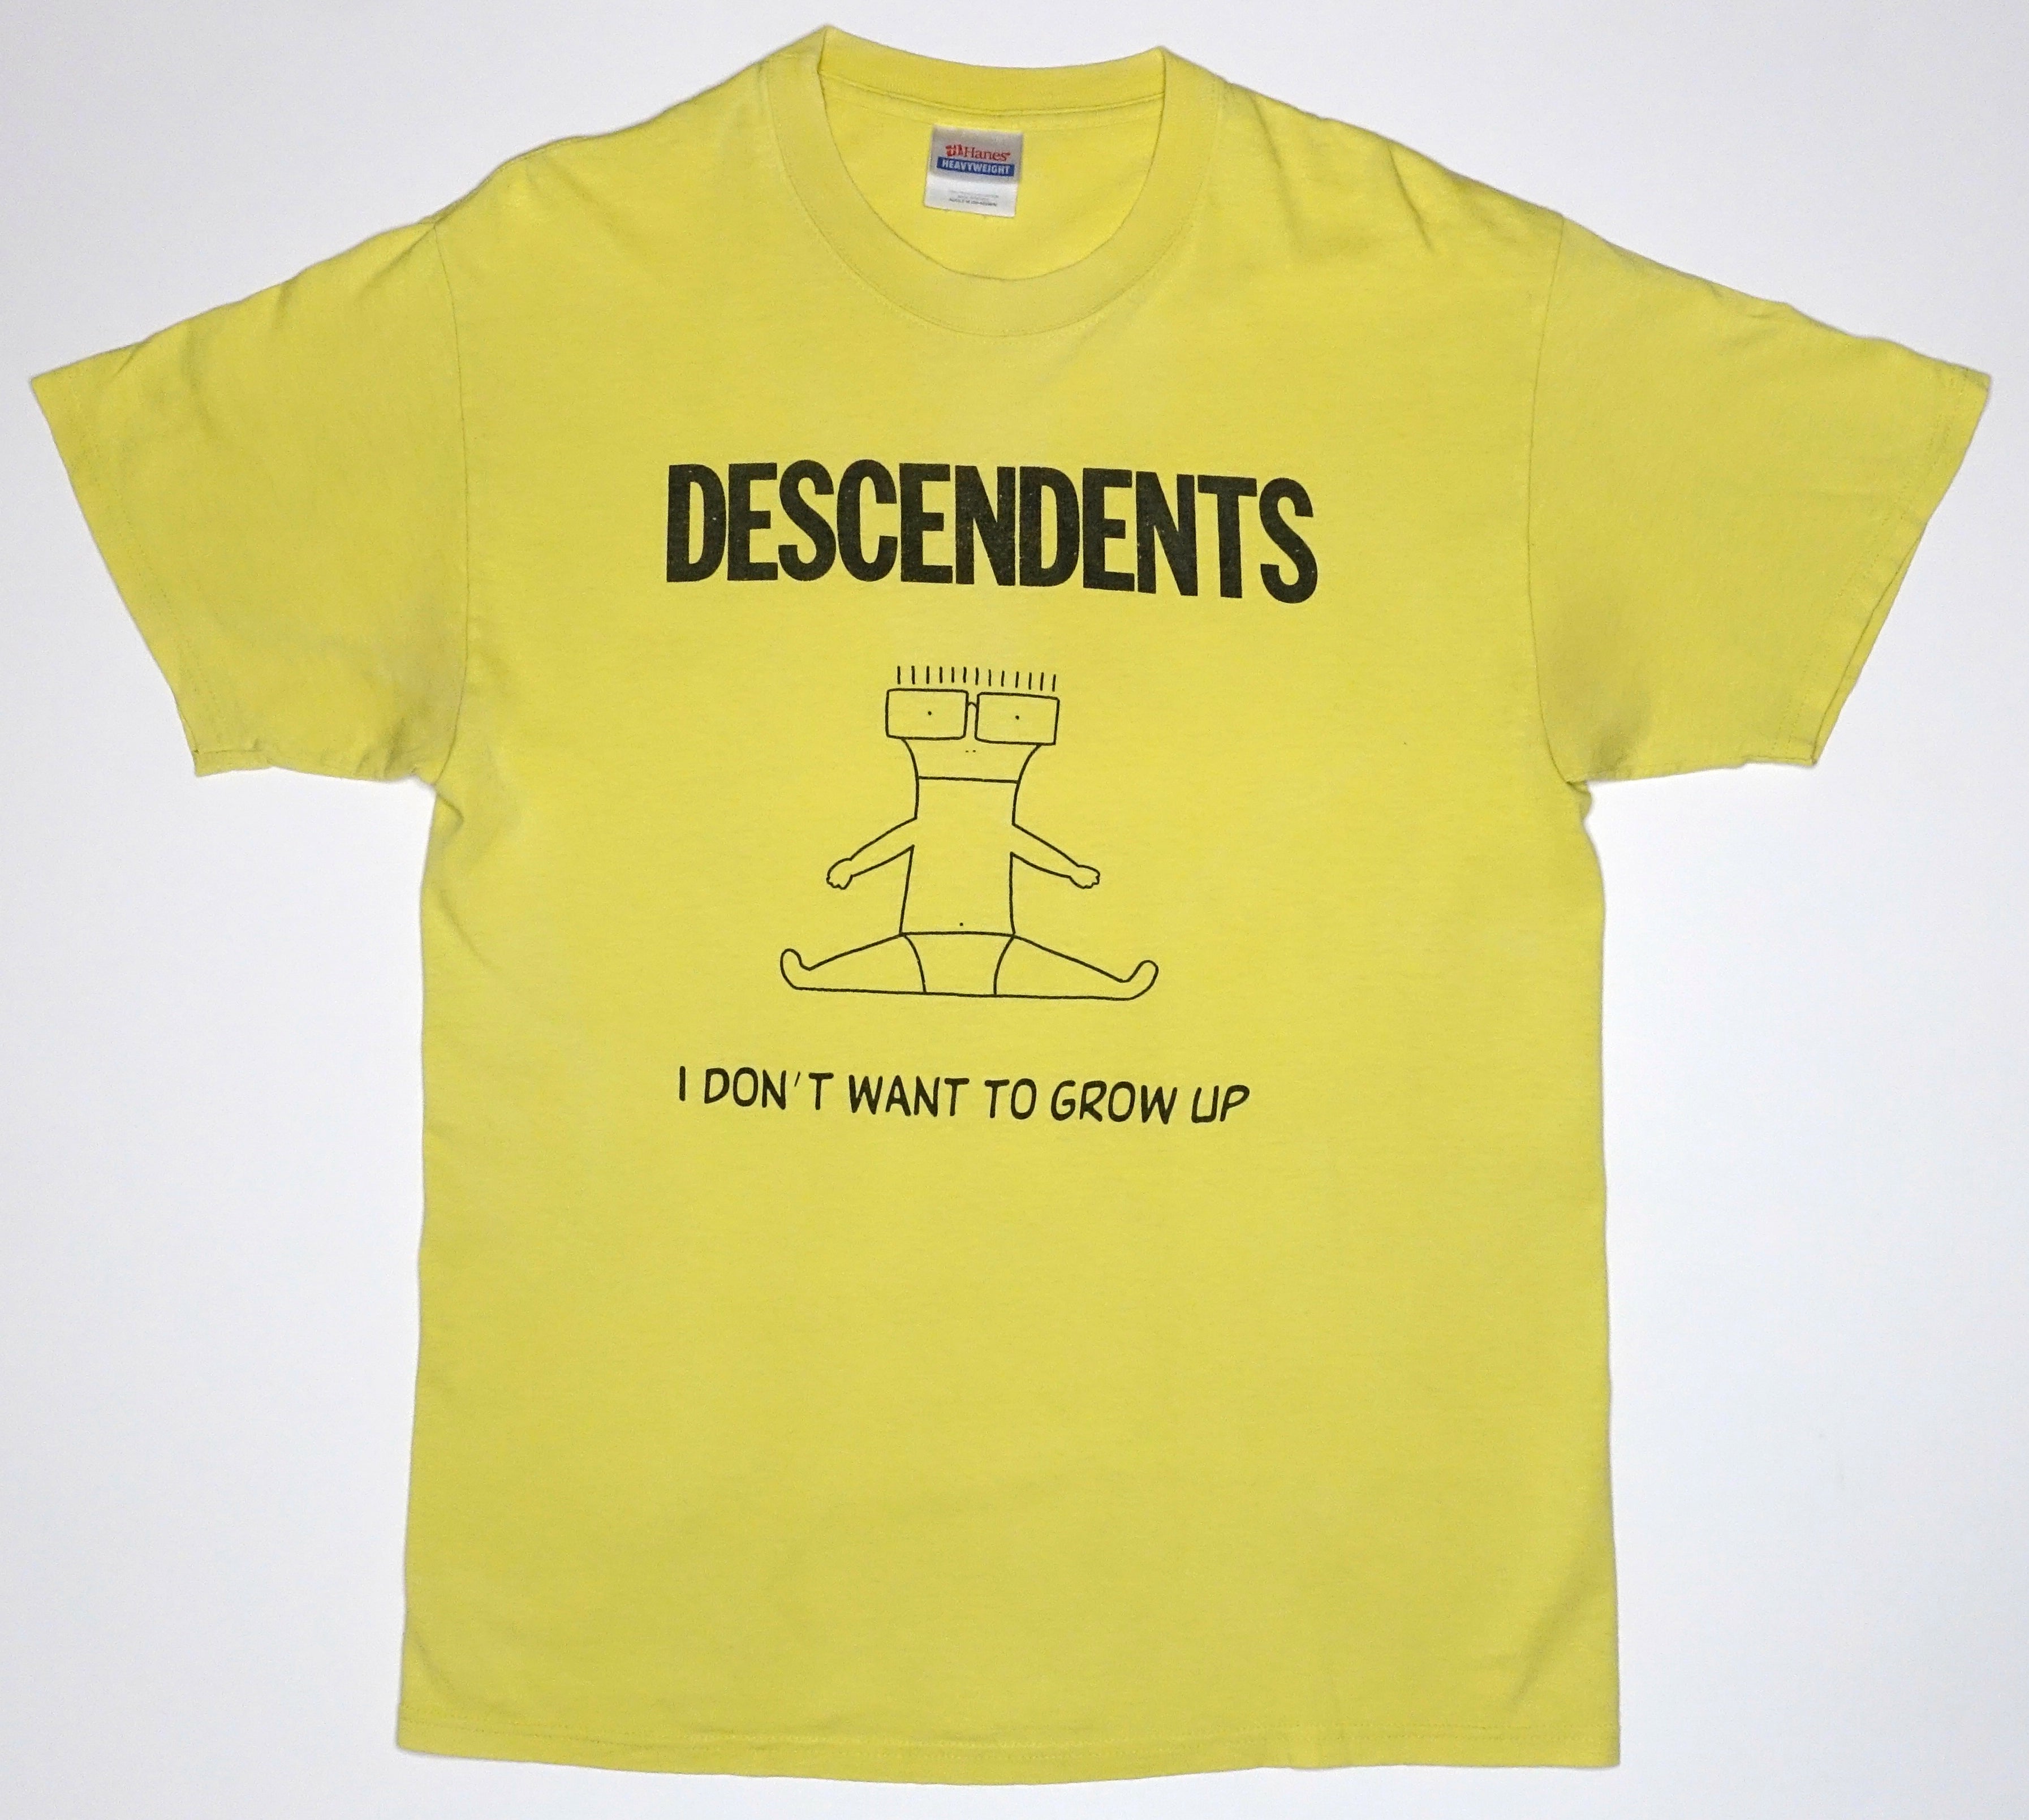 Descendents - I Don't Want To Grow Up Yellow Tour Shirt Size Medium